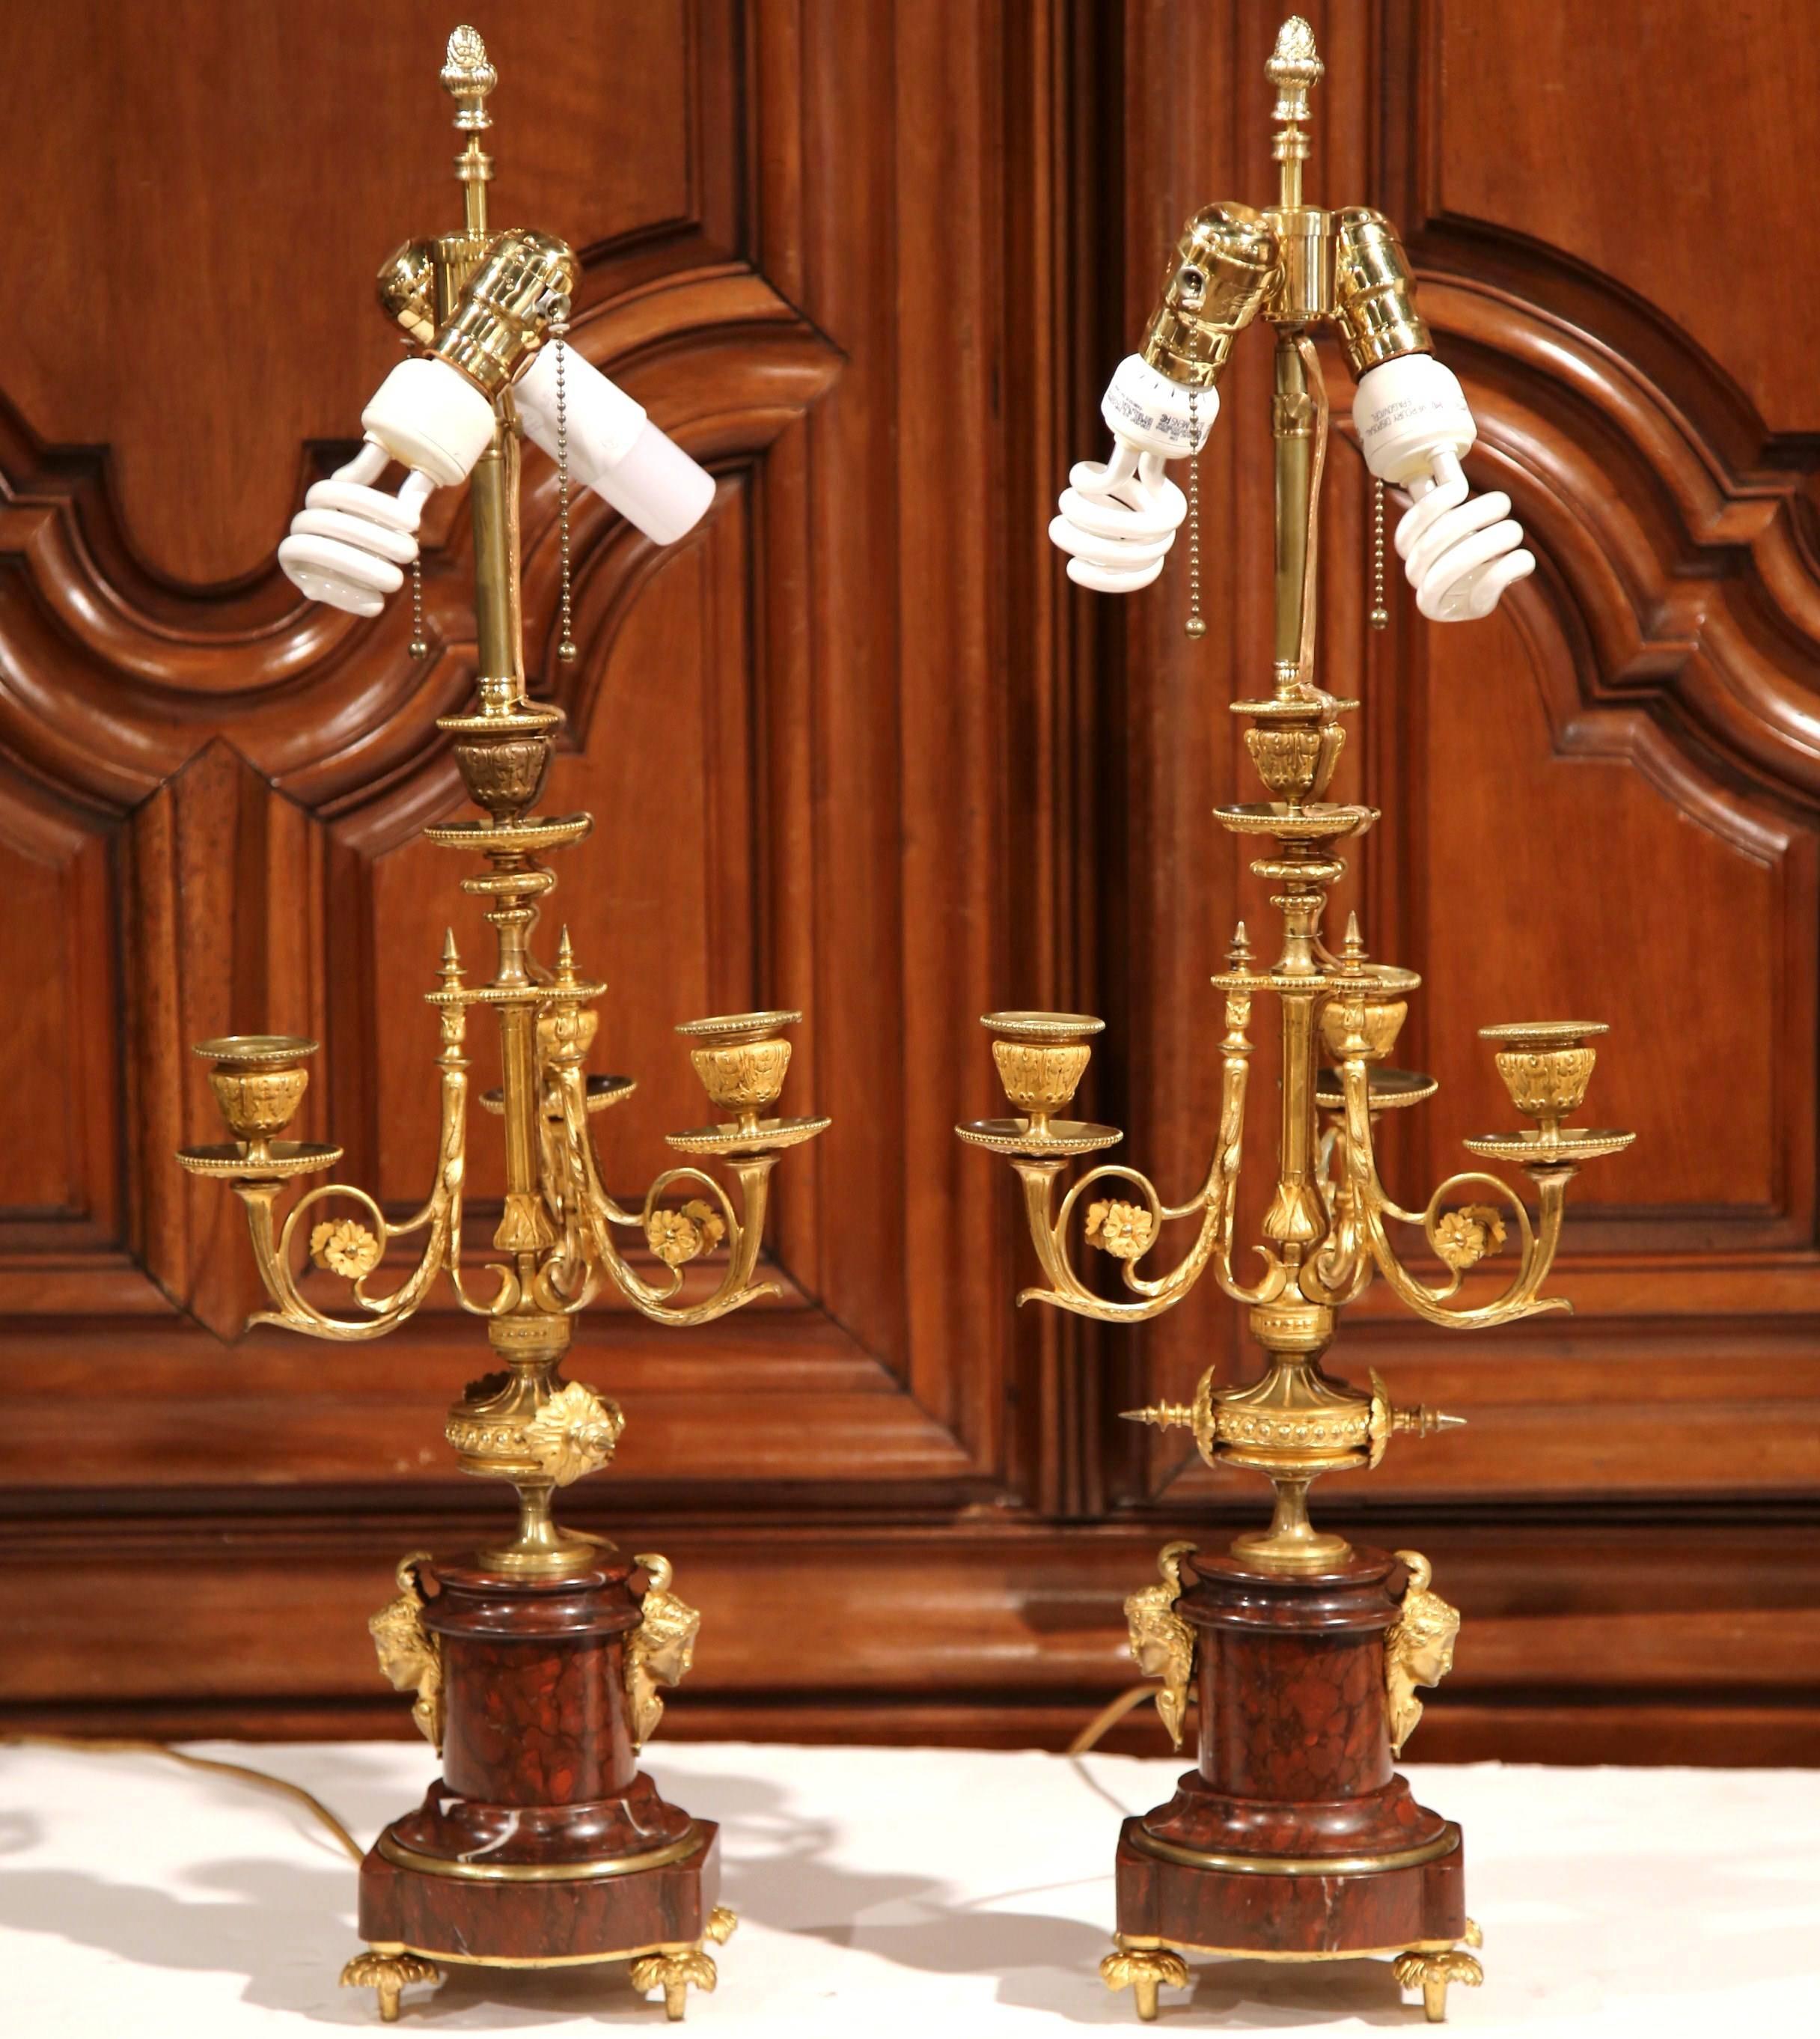 This large pair of Napoleon III antique candelabra was created in France, circa 1880. Each of the three-light bronze candelabras has a red marble base, which has been mounted into elegant lamps. The table lamps feature women's faces mounted on the